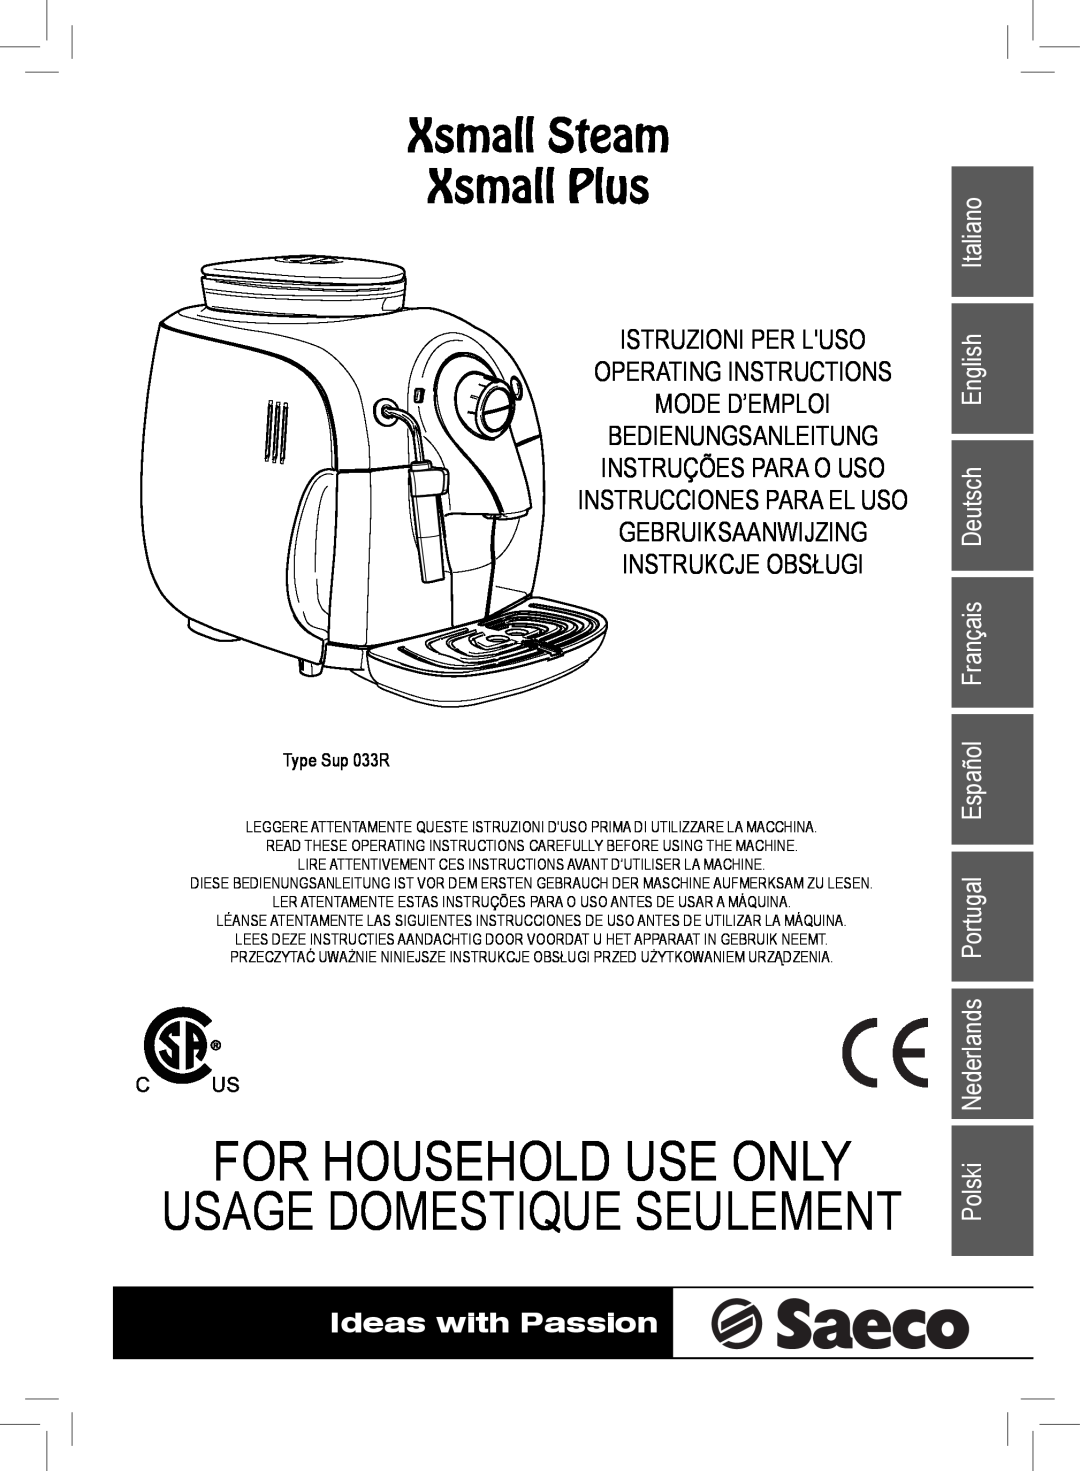 Saeco Coffee Makers PLUS manual For Household Use Only, Usage Domestique Seulement, Xsmall Steam Xsmall Plus, Italiano 